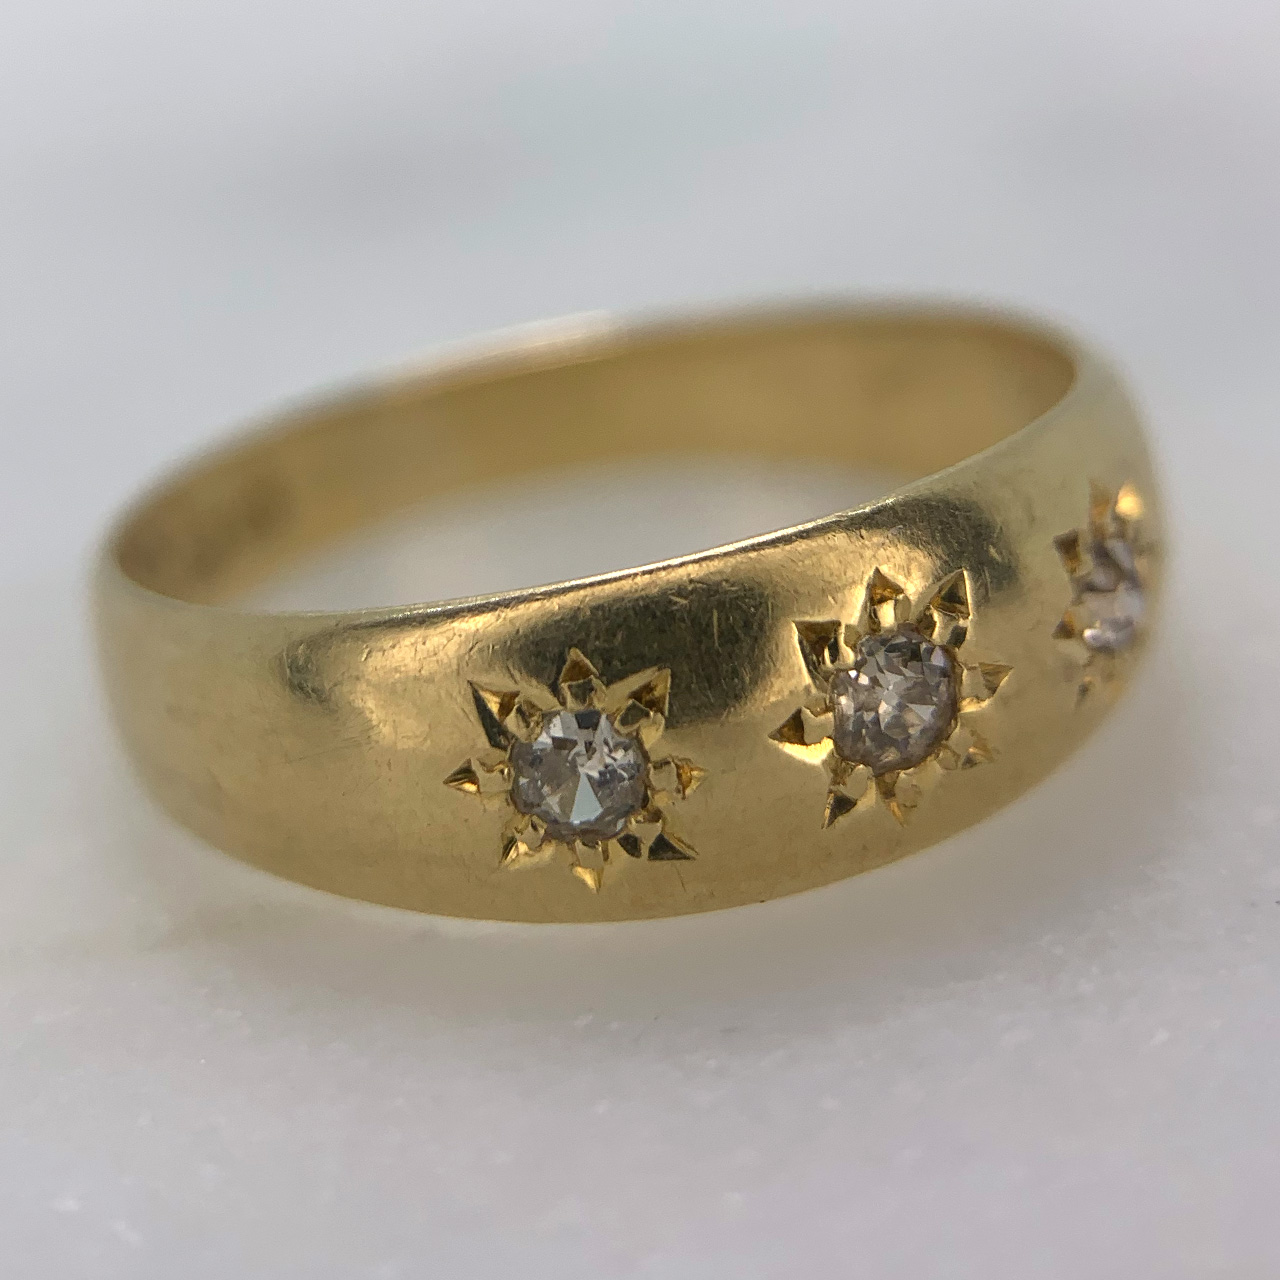 Antique Diamond 3-stone Gypsy Ring in 18ct yellow Gold, Hallmarked Birmingham (1915). This stunning gypsy ring holds three star set diamonds totalling at 0.25 carats of diamond weight. The shank is polished with clear hallmark and makers mark on the inside.